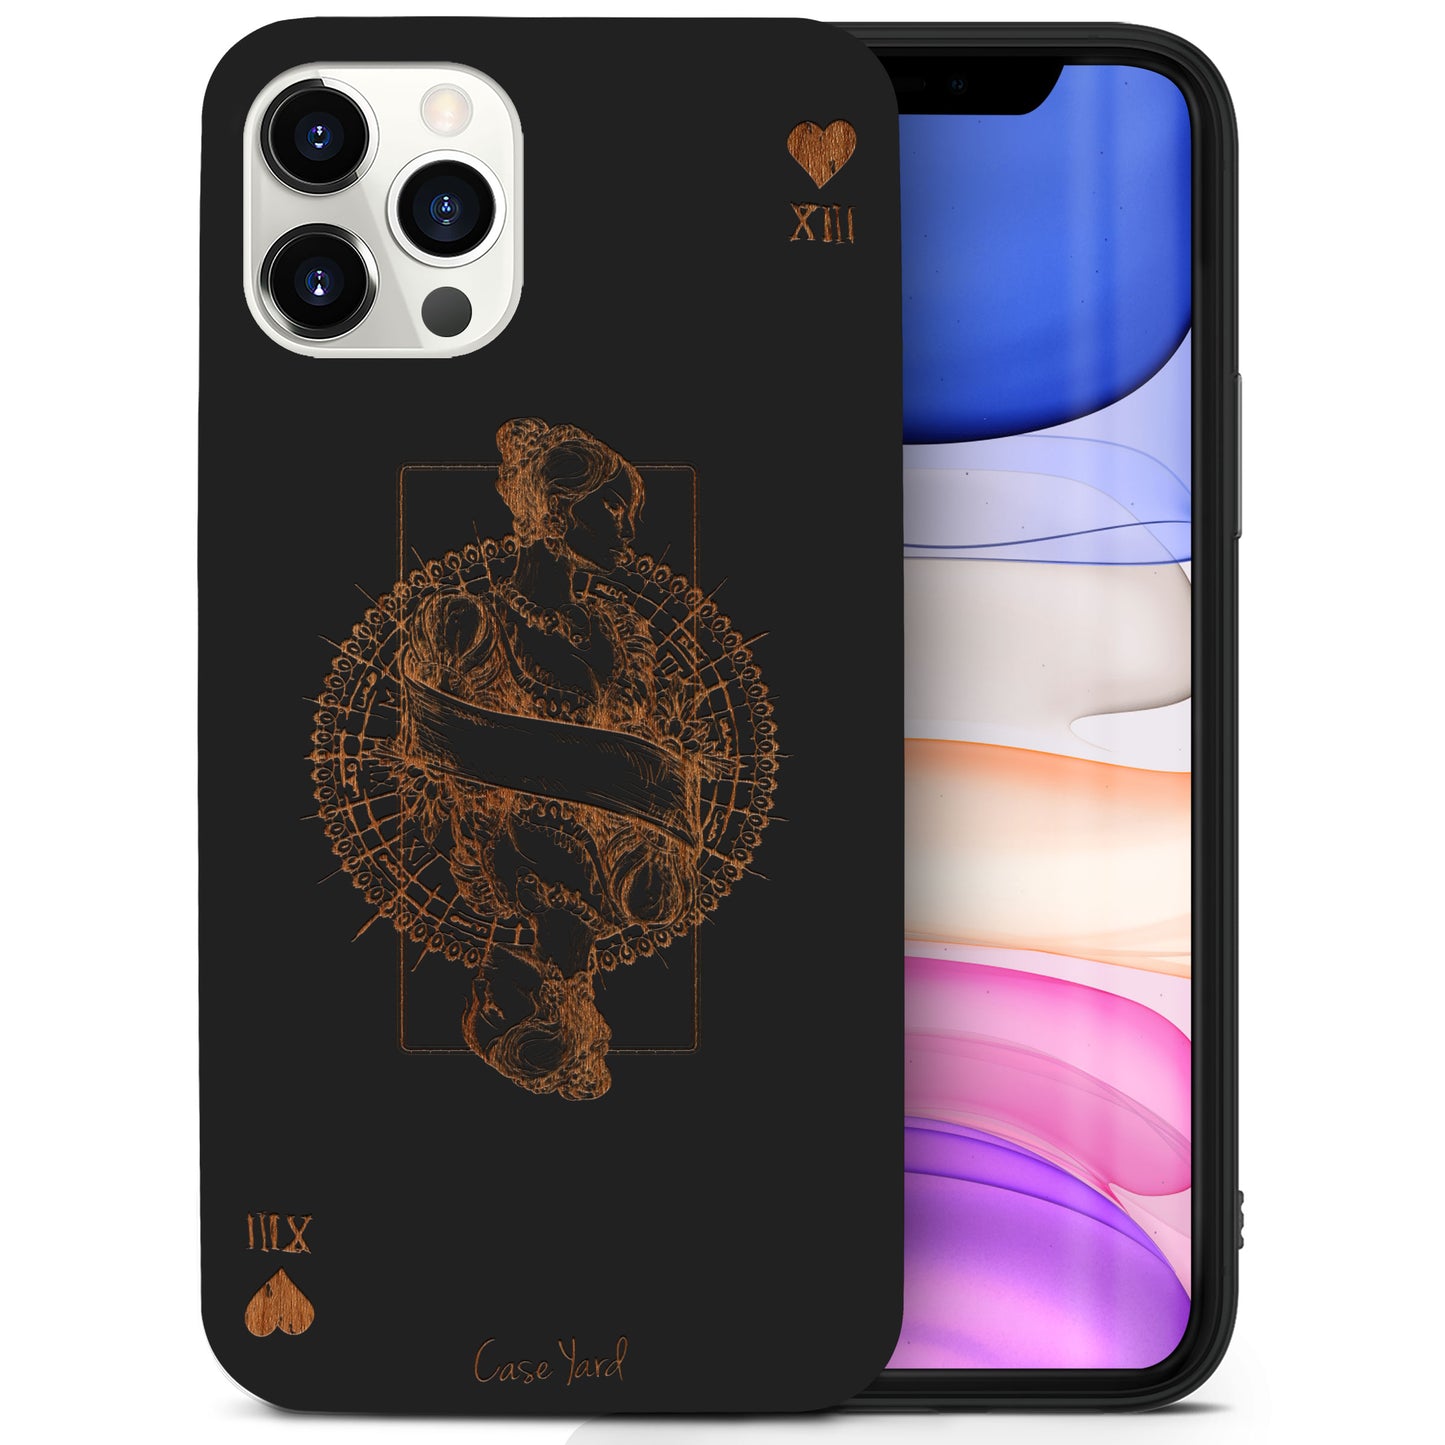 Wooden Cell Phone Case Cover, Laser Engraved case for iPhone & Samsung phone Queen of Hearts Design